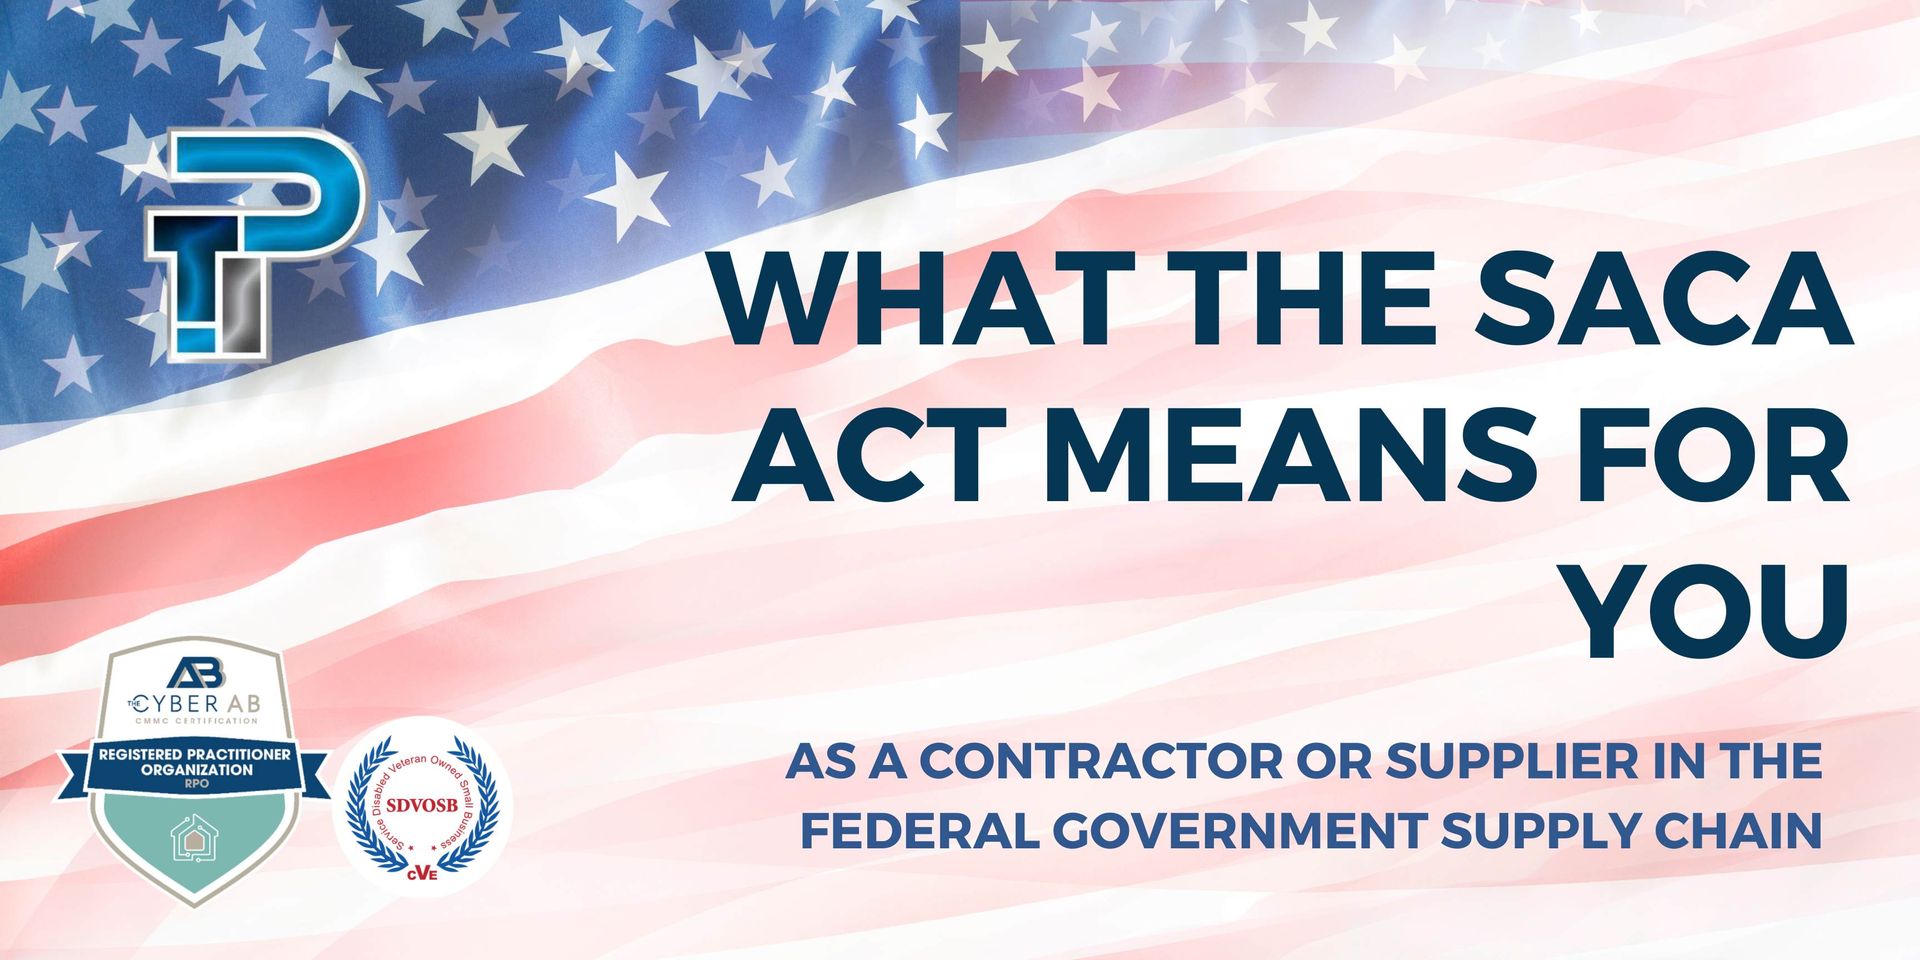 What the SACA act means for your business